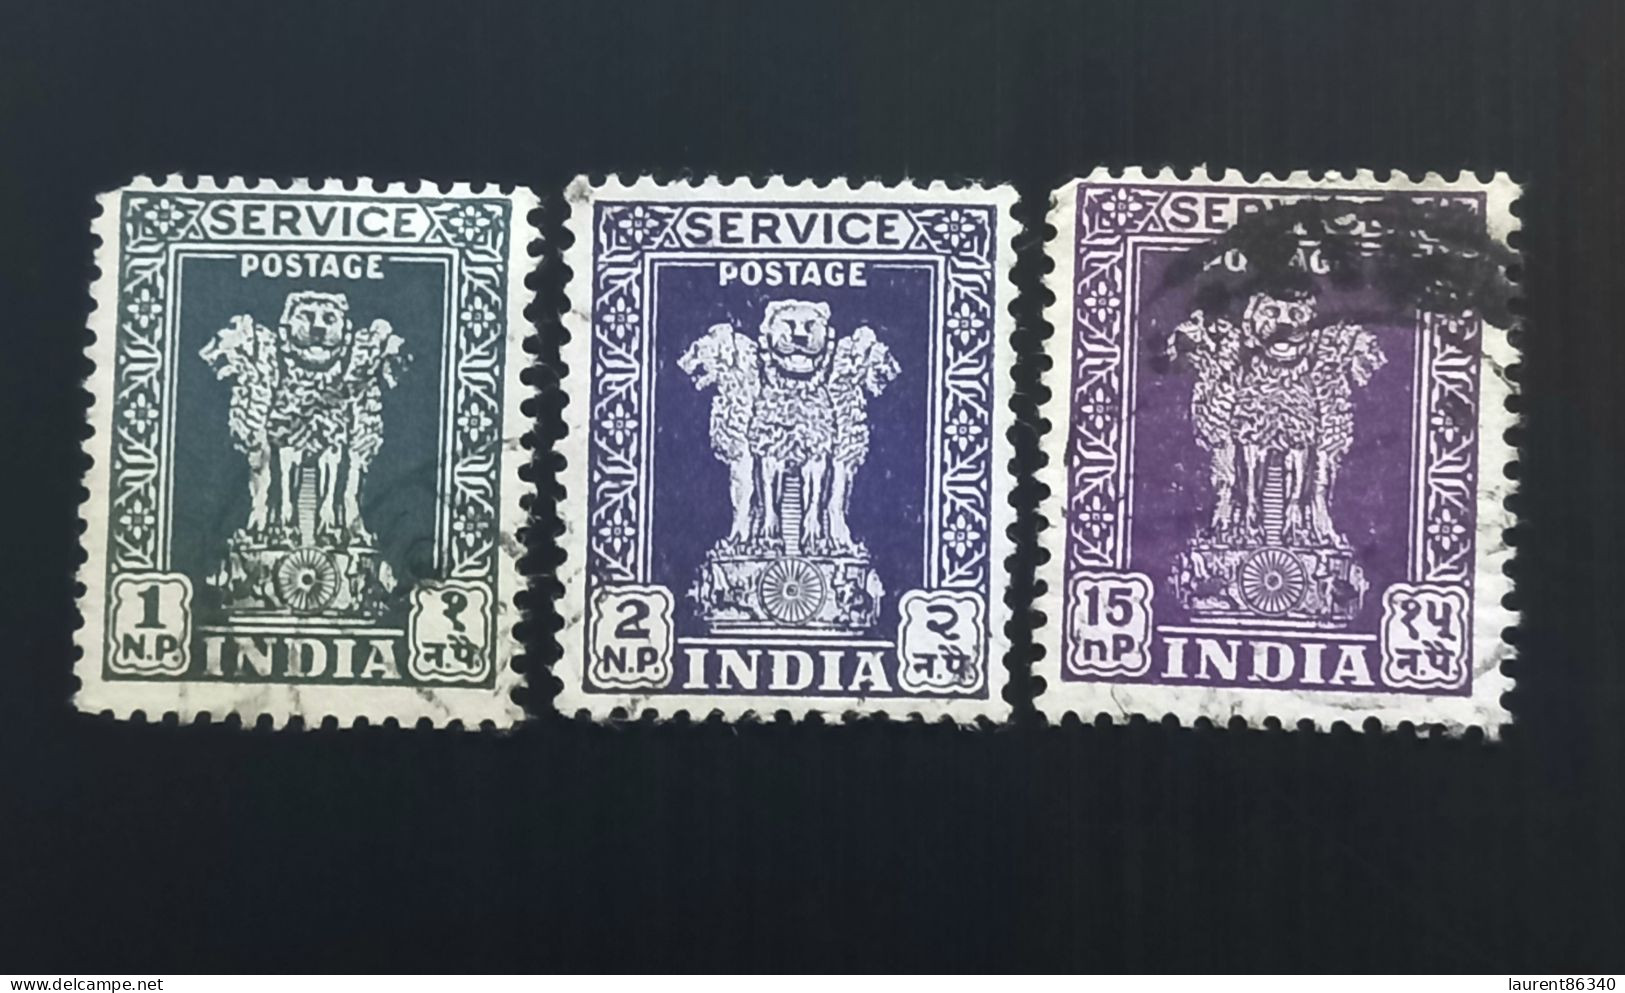 INDE 1950  Capital Of Asoka Pillar  3 Lions - 3 Stamps Services Used - Used Stamps